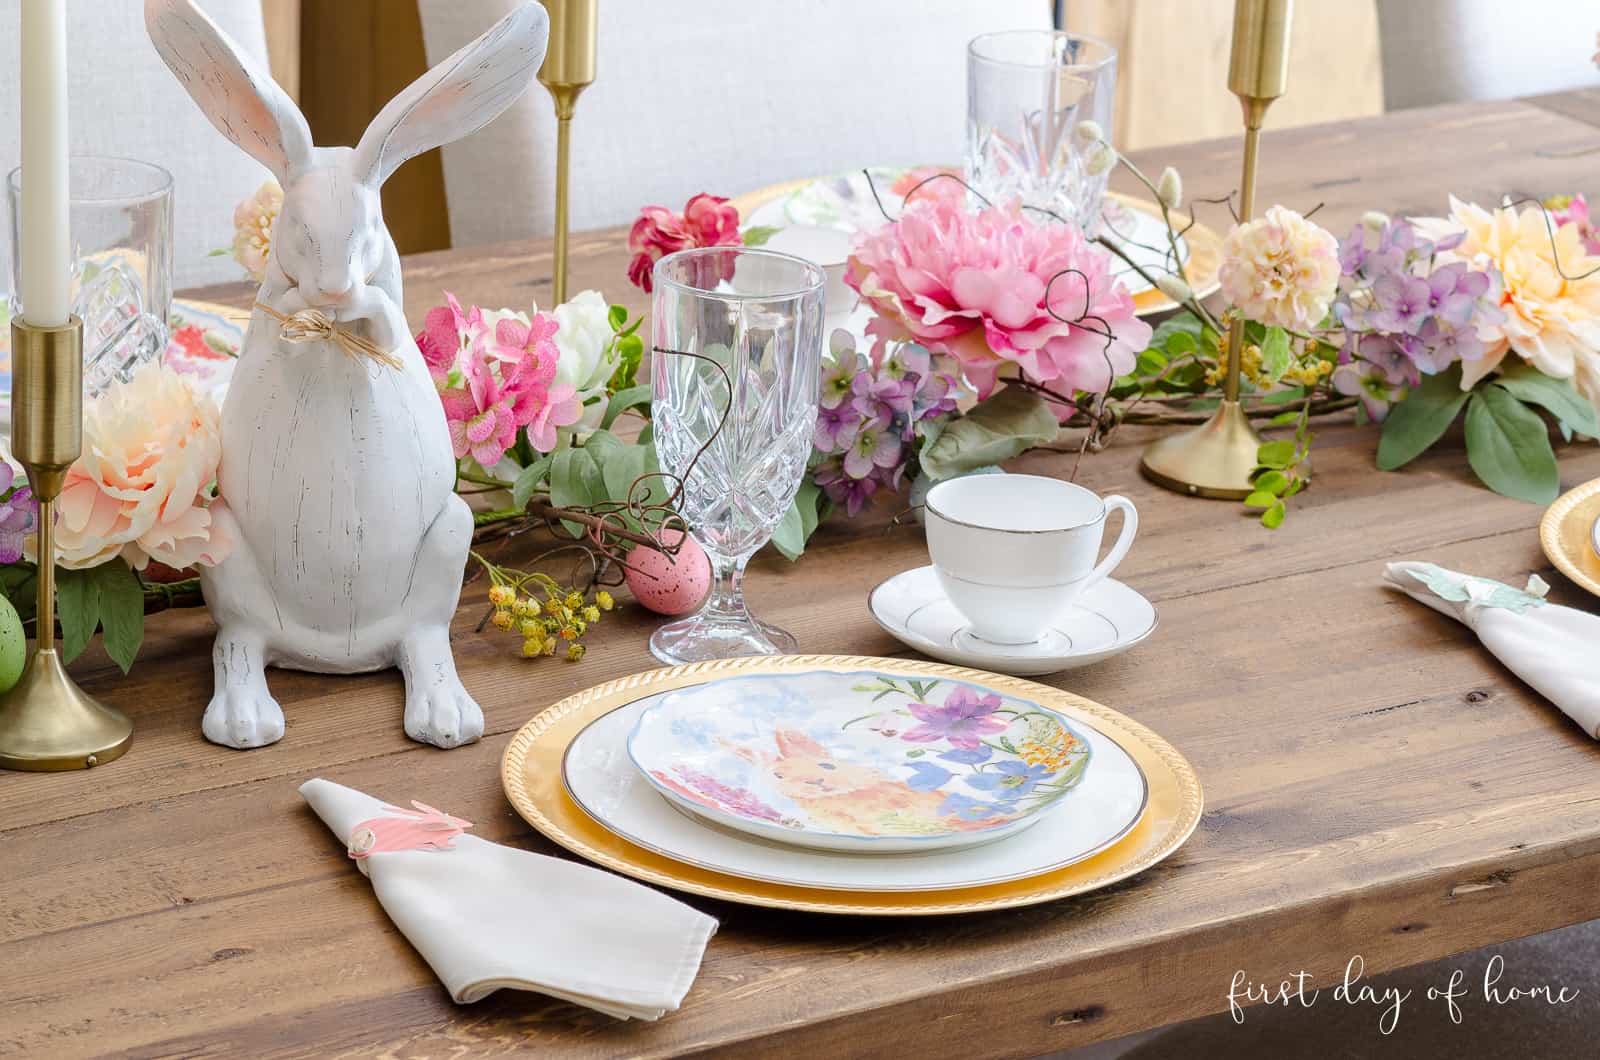 Easter table setting decorating ideas with napkins, napkin rings and bunny plate